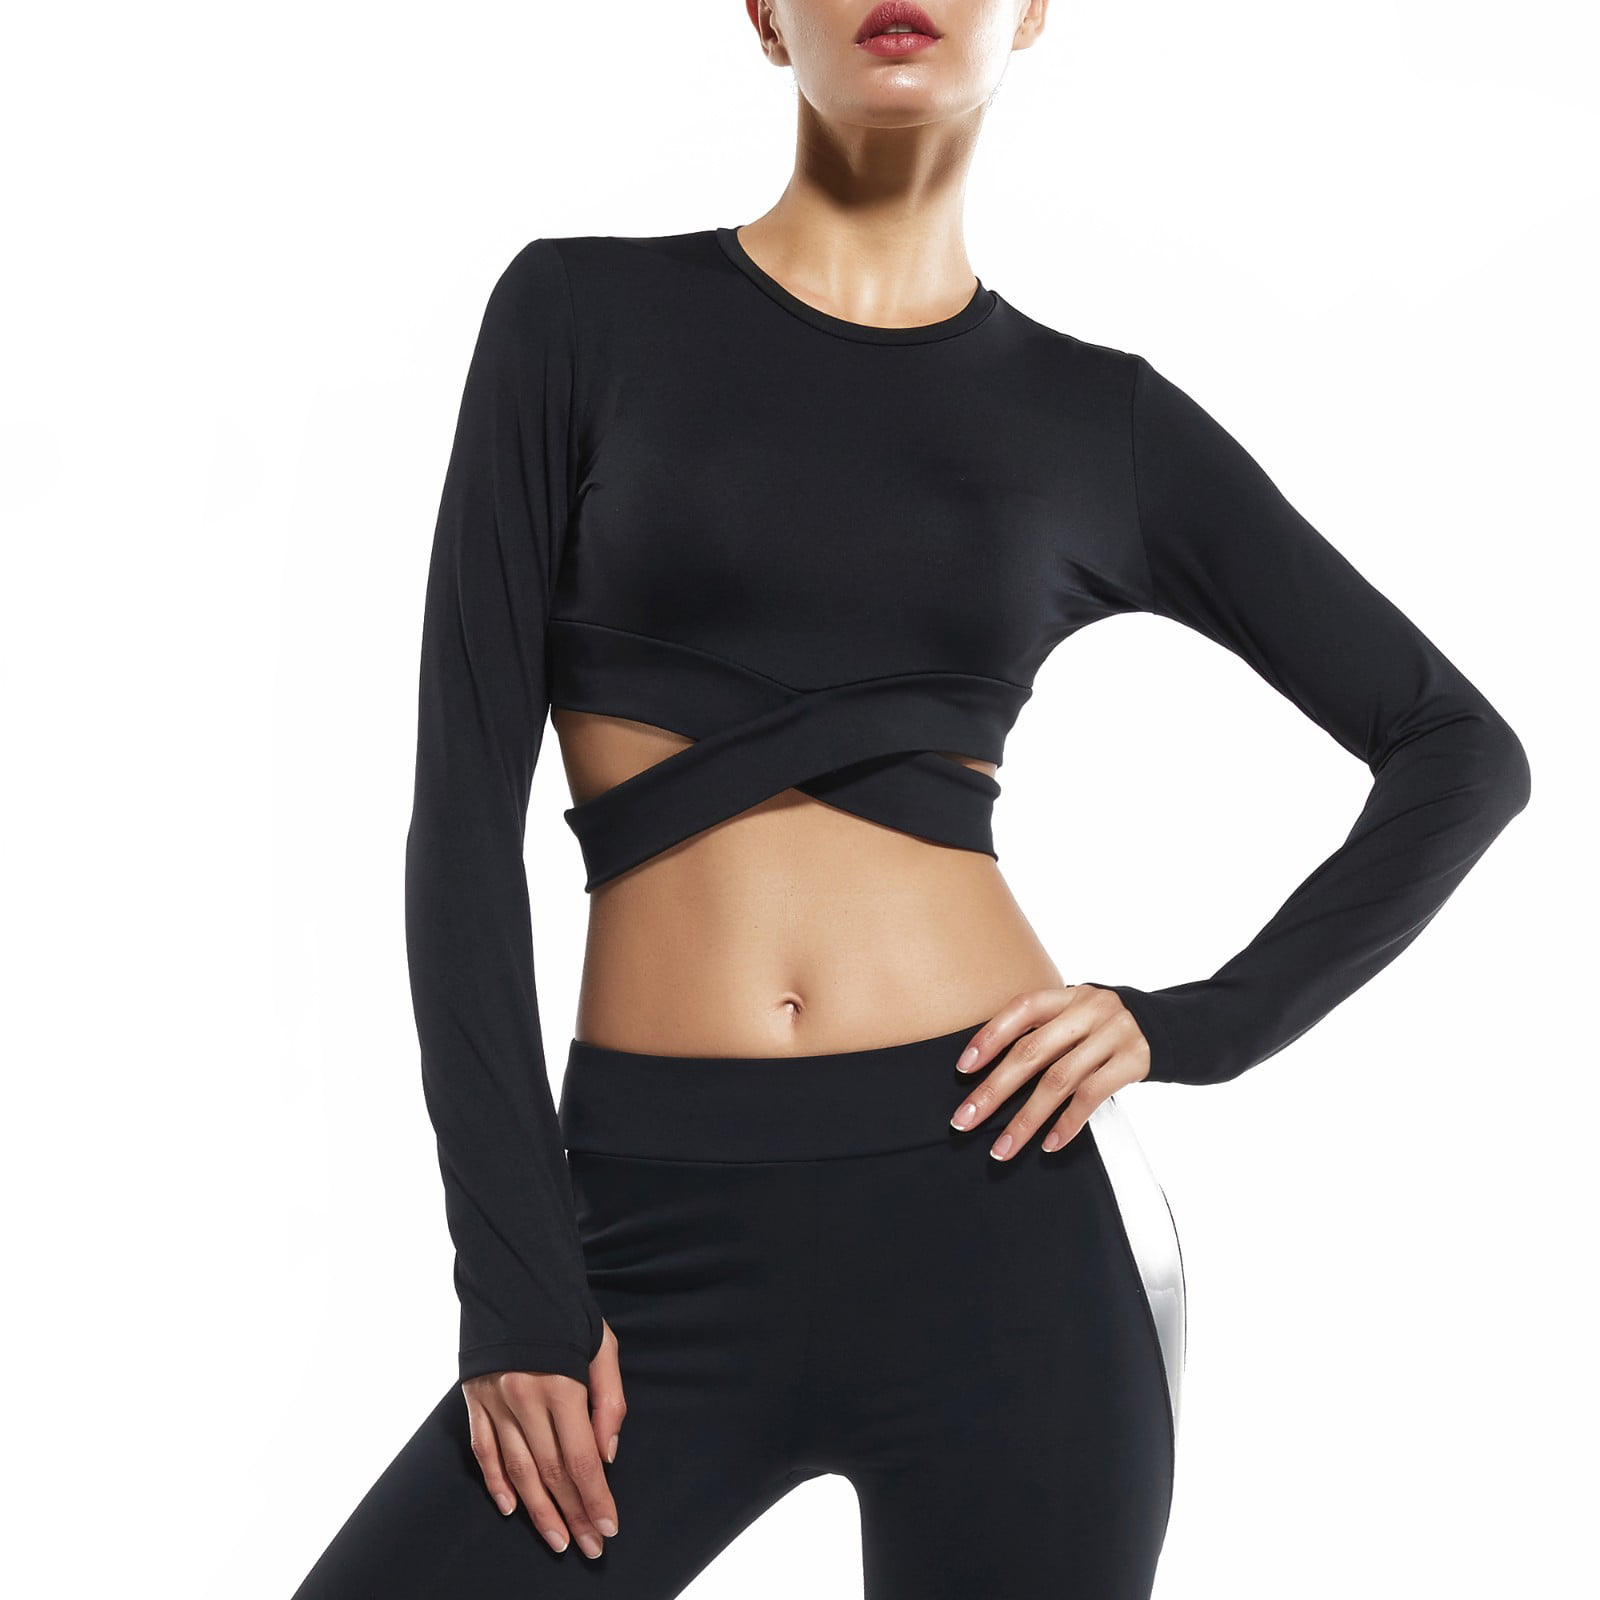 RIOJOY Yoga Gym Crop Tops Women Short Sleeve Front Tie Bubble Textured Workout Shirts Tees Selling Separately